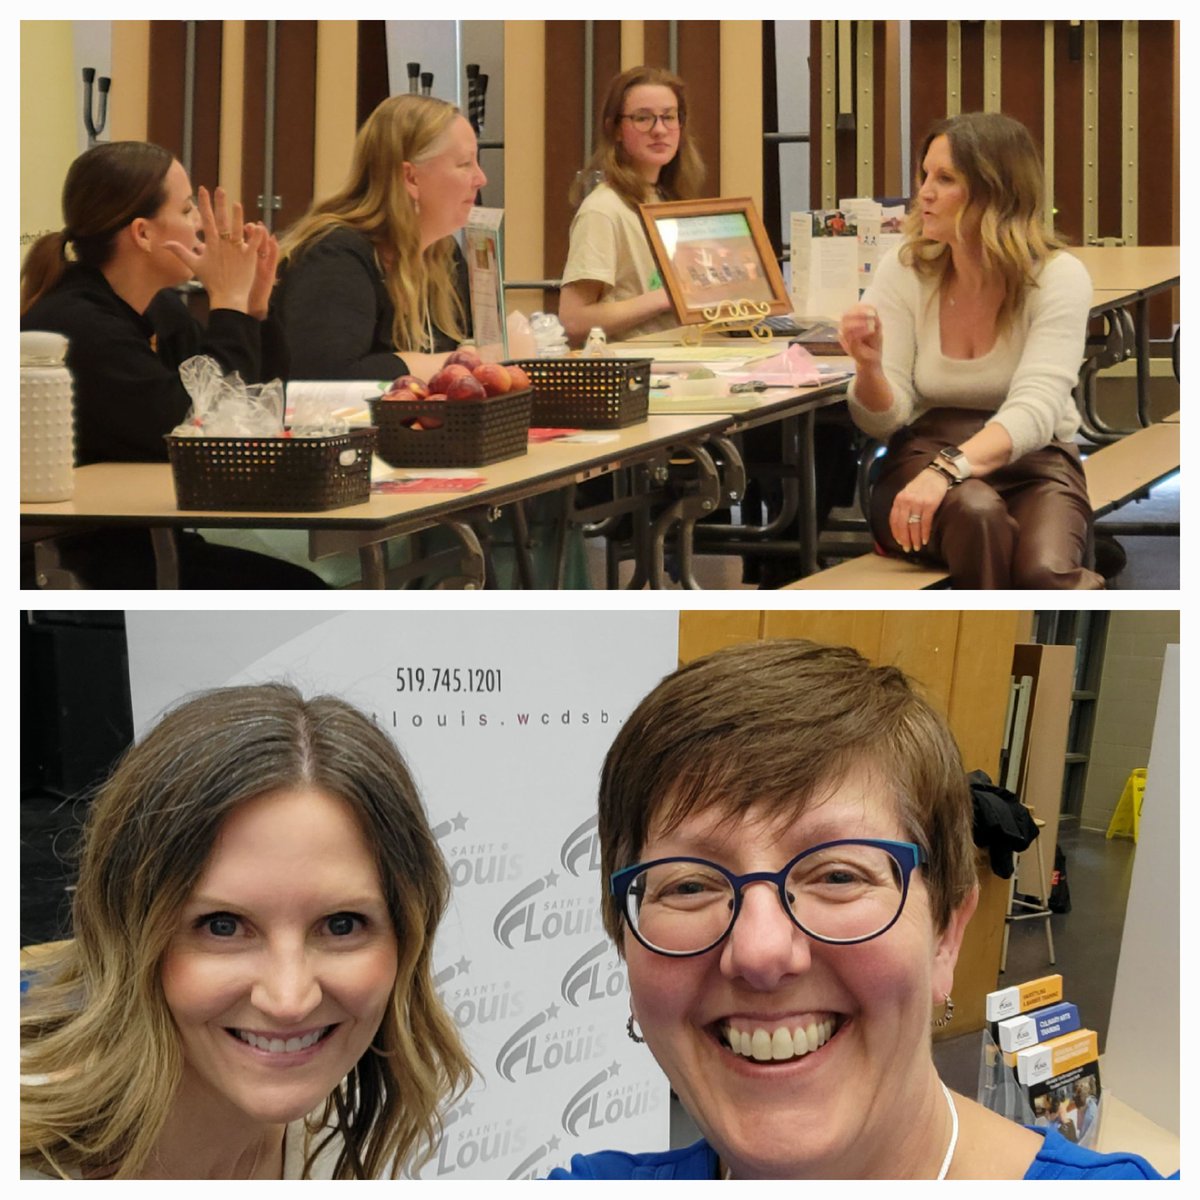 Spending time with @St_Marys_Kitch @SMHS_Guidance for their parent community information night. Current St. Mary's principal and former @StLouisWCDSB  VP @DeannaWehrle stopped by our info table. #alwayssmiling #goodenergy #chattingwithpartners